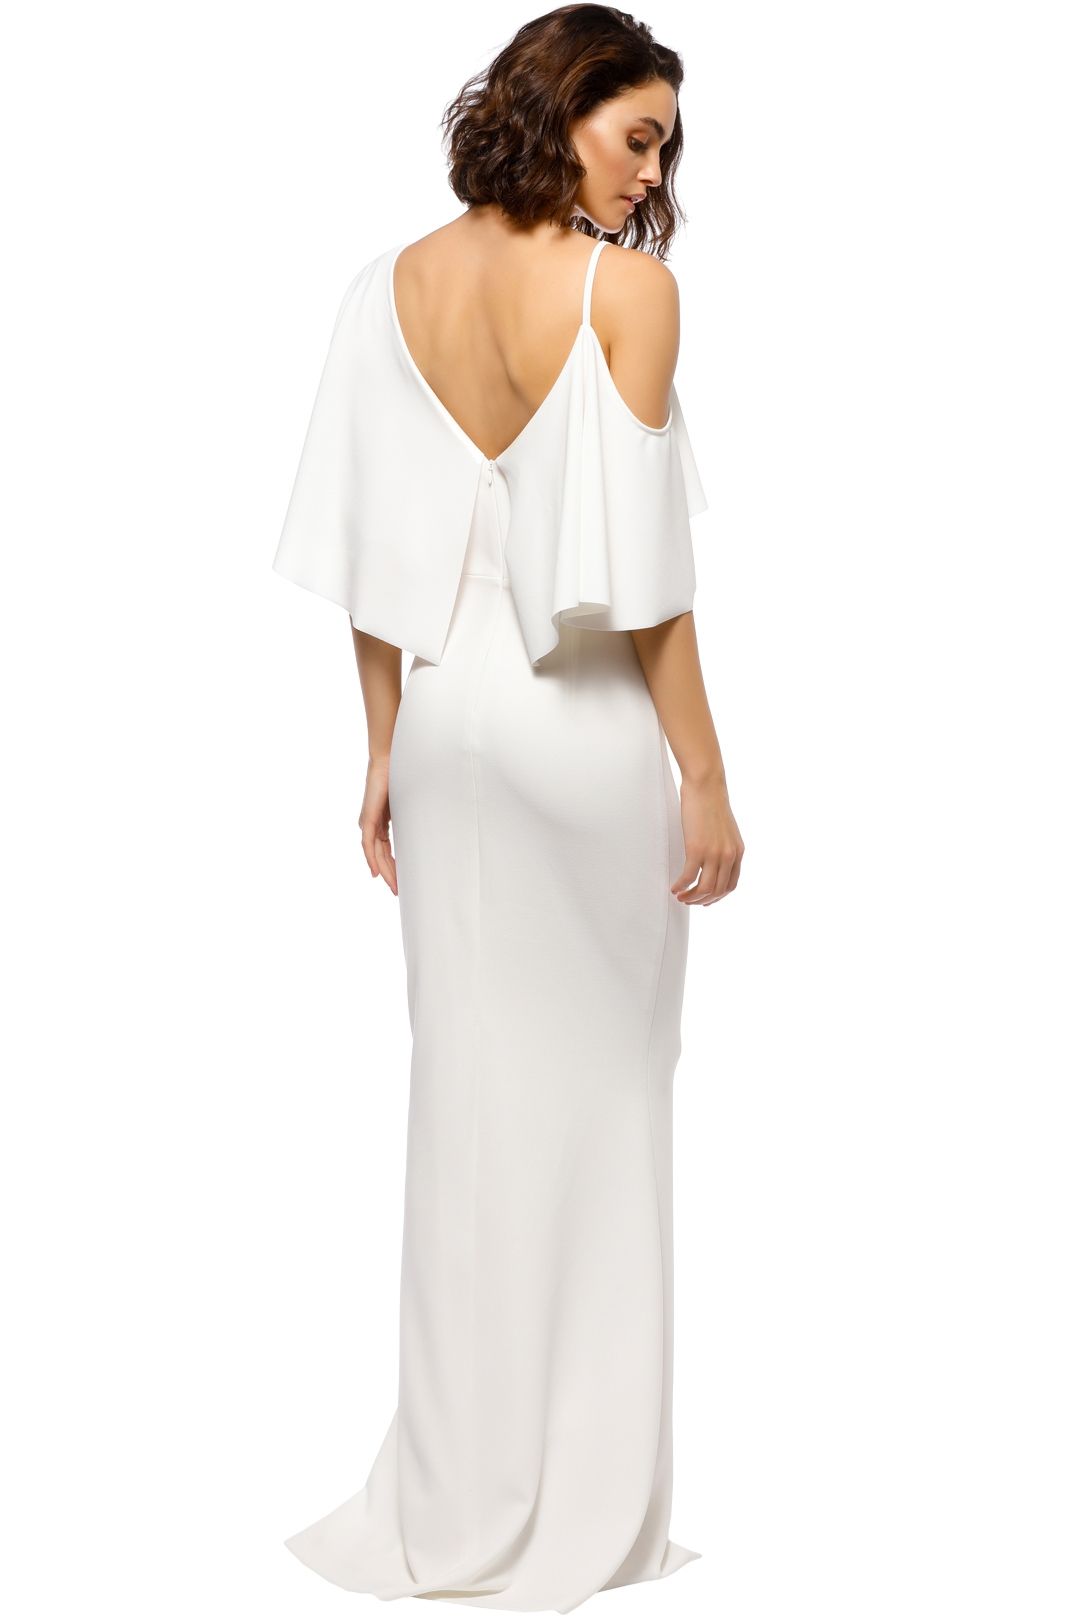 Pasduchas - Irreplaceable Gown - Ivory - Back